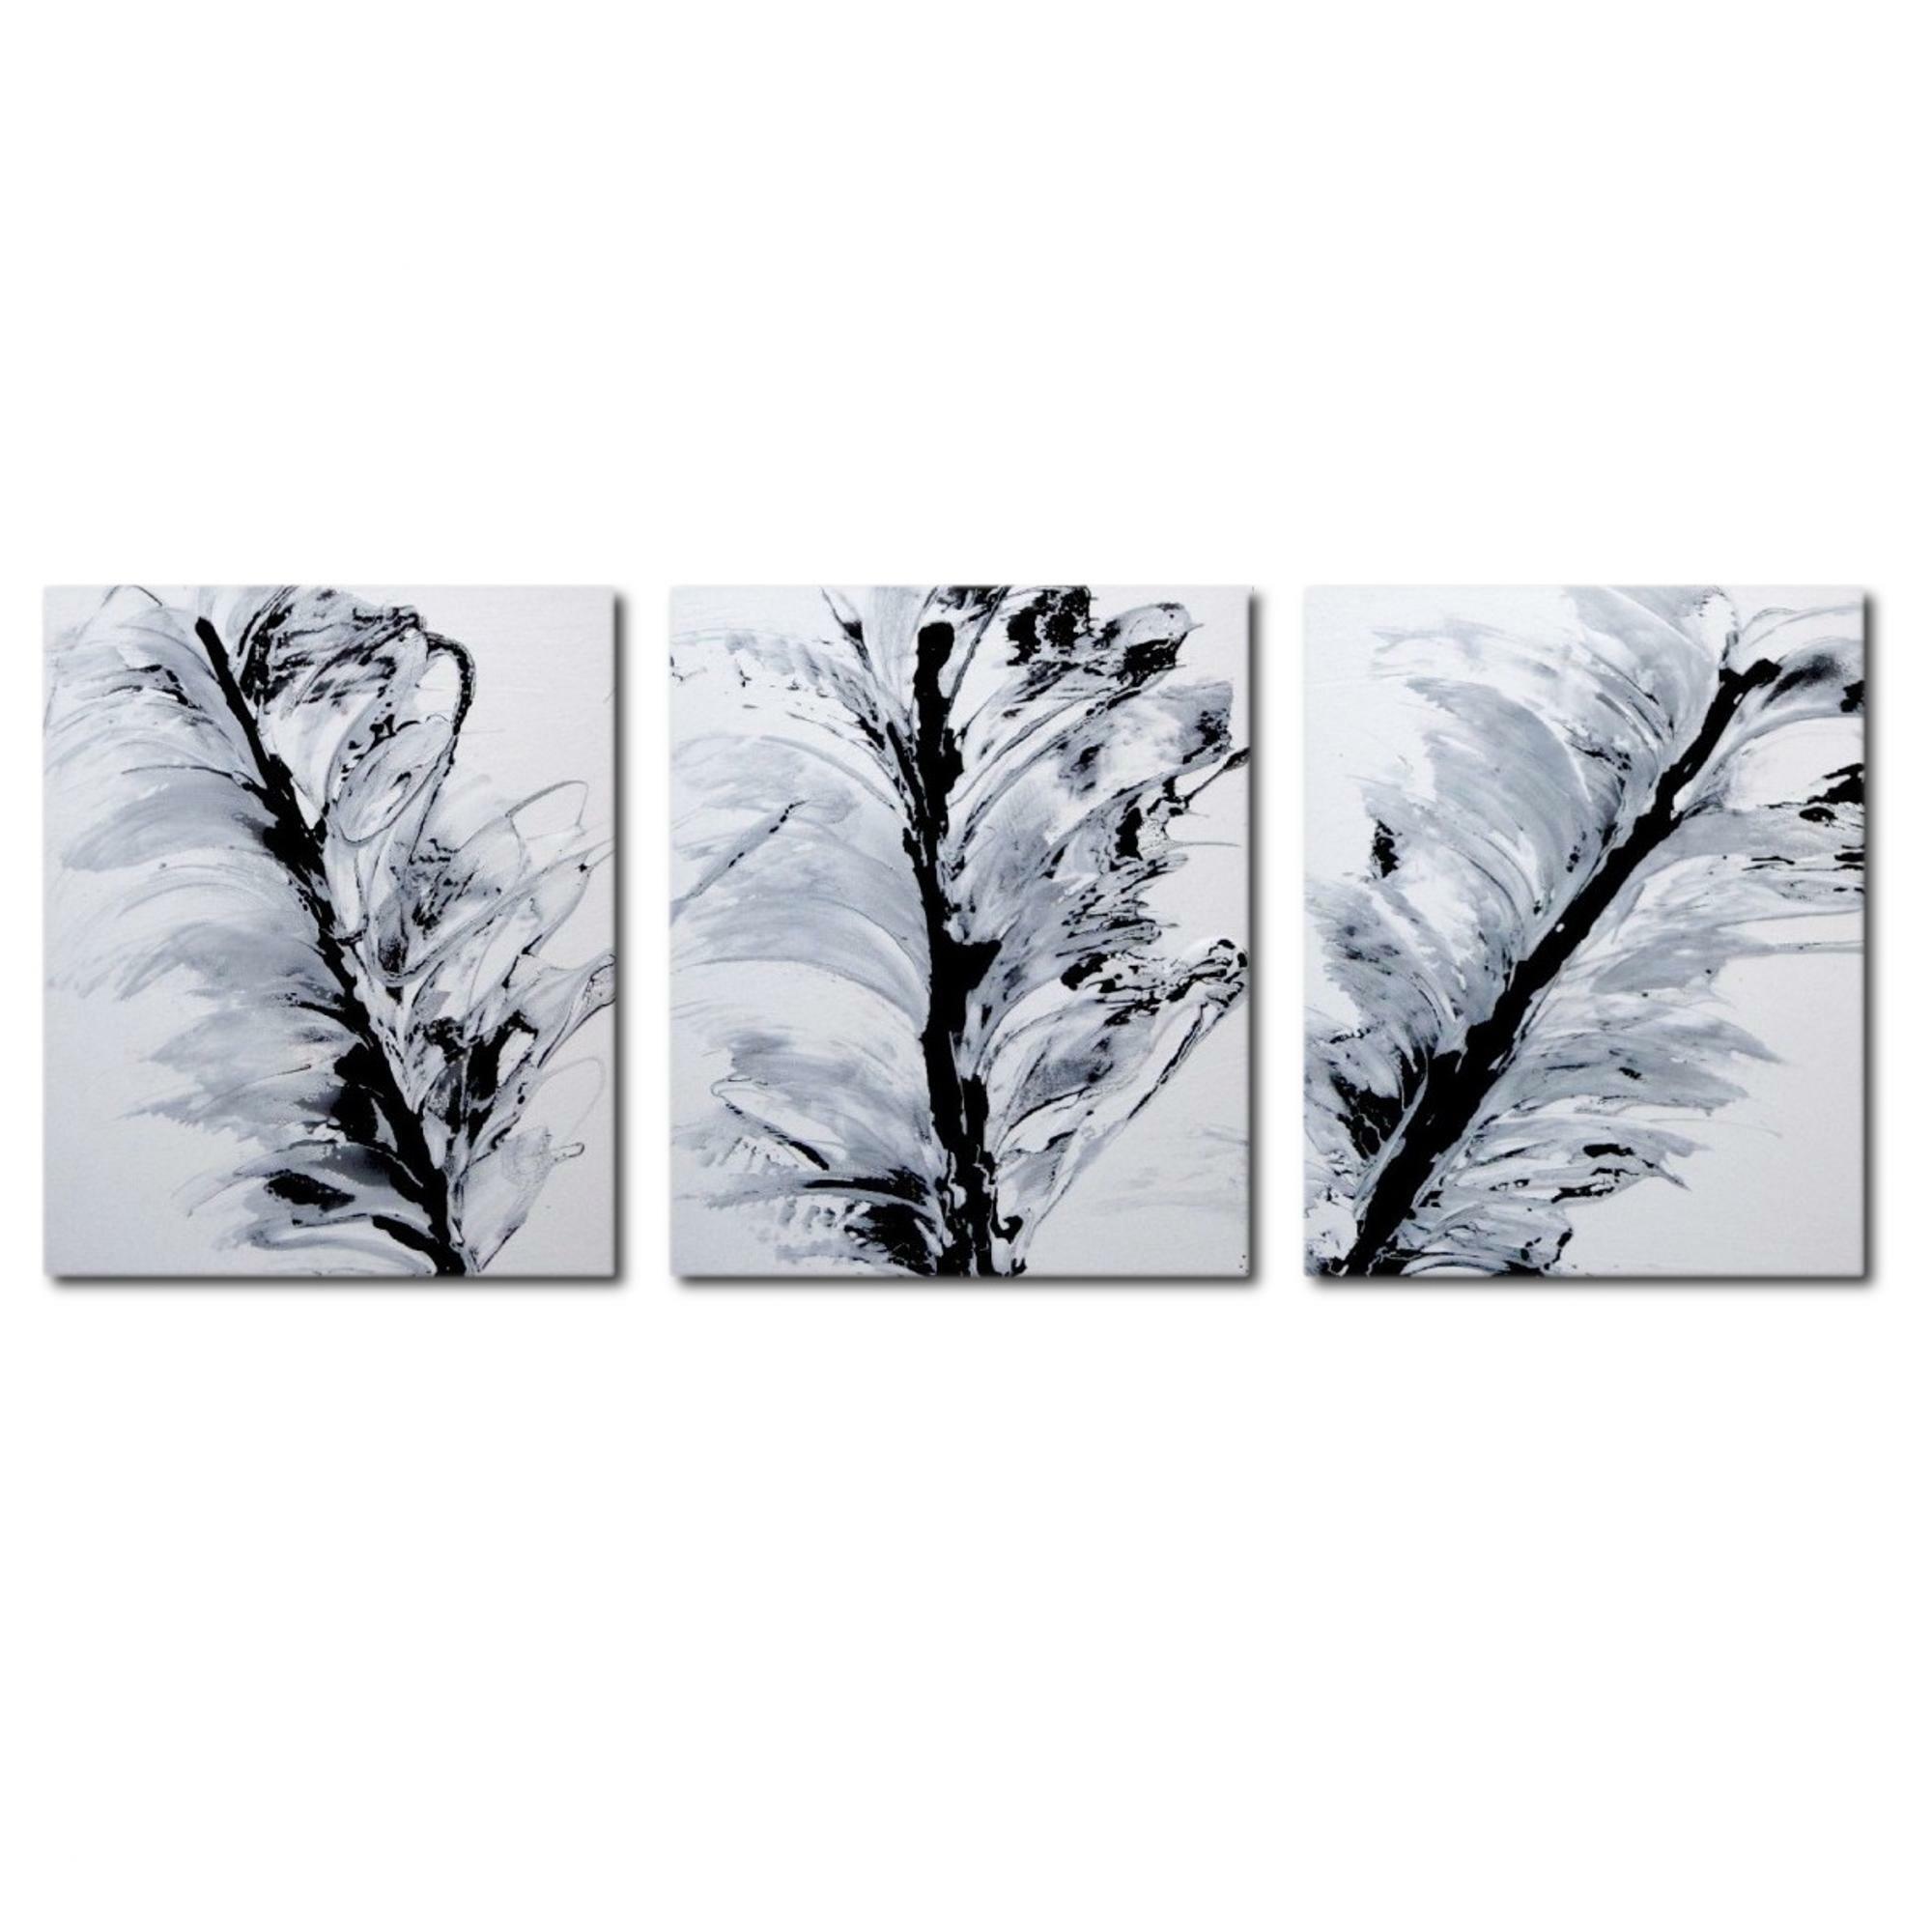 Decor Abstract Art 3 Piece Abstract Canvas Painting In Black White Reviews Temple Webster